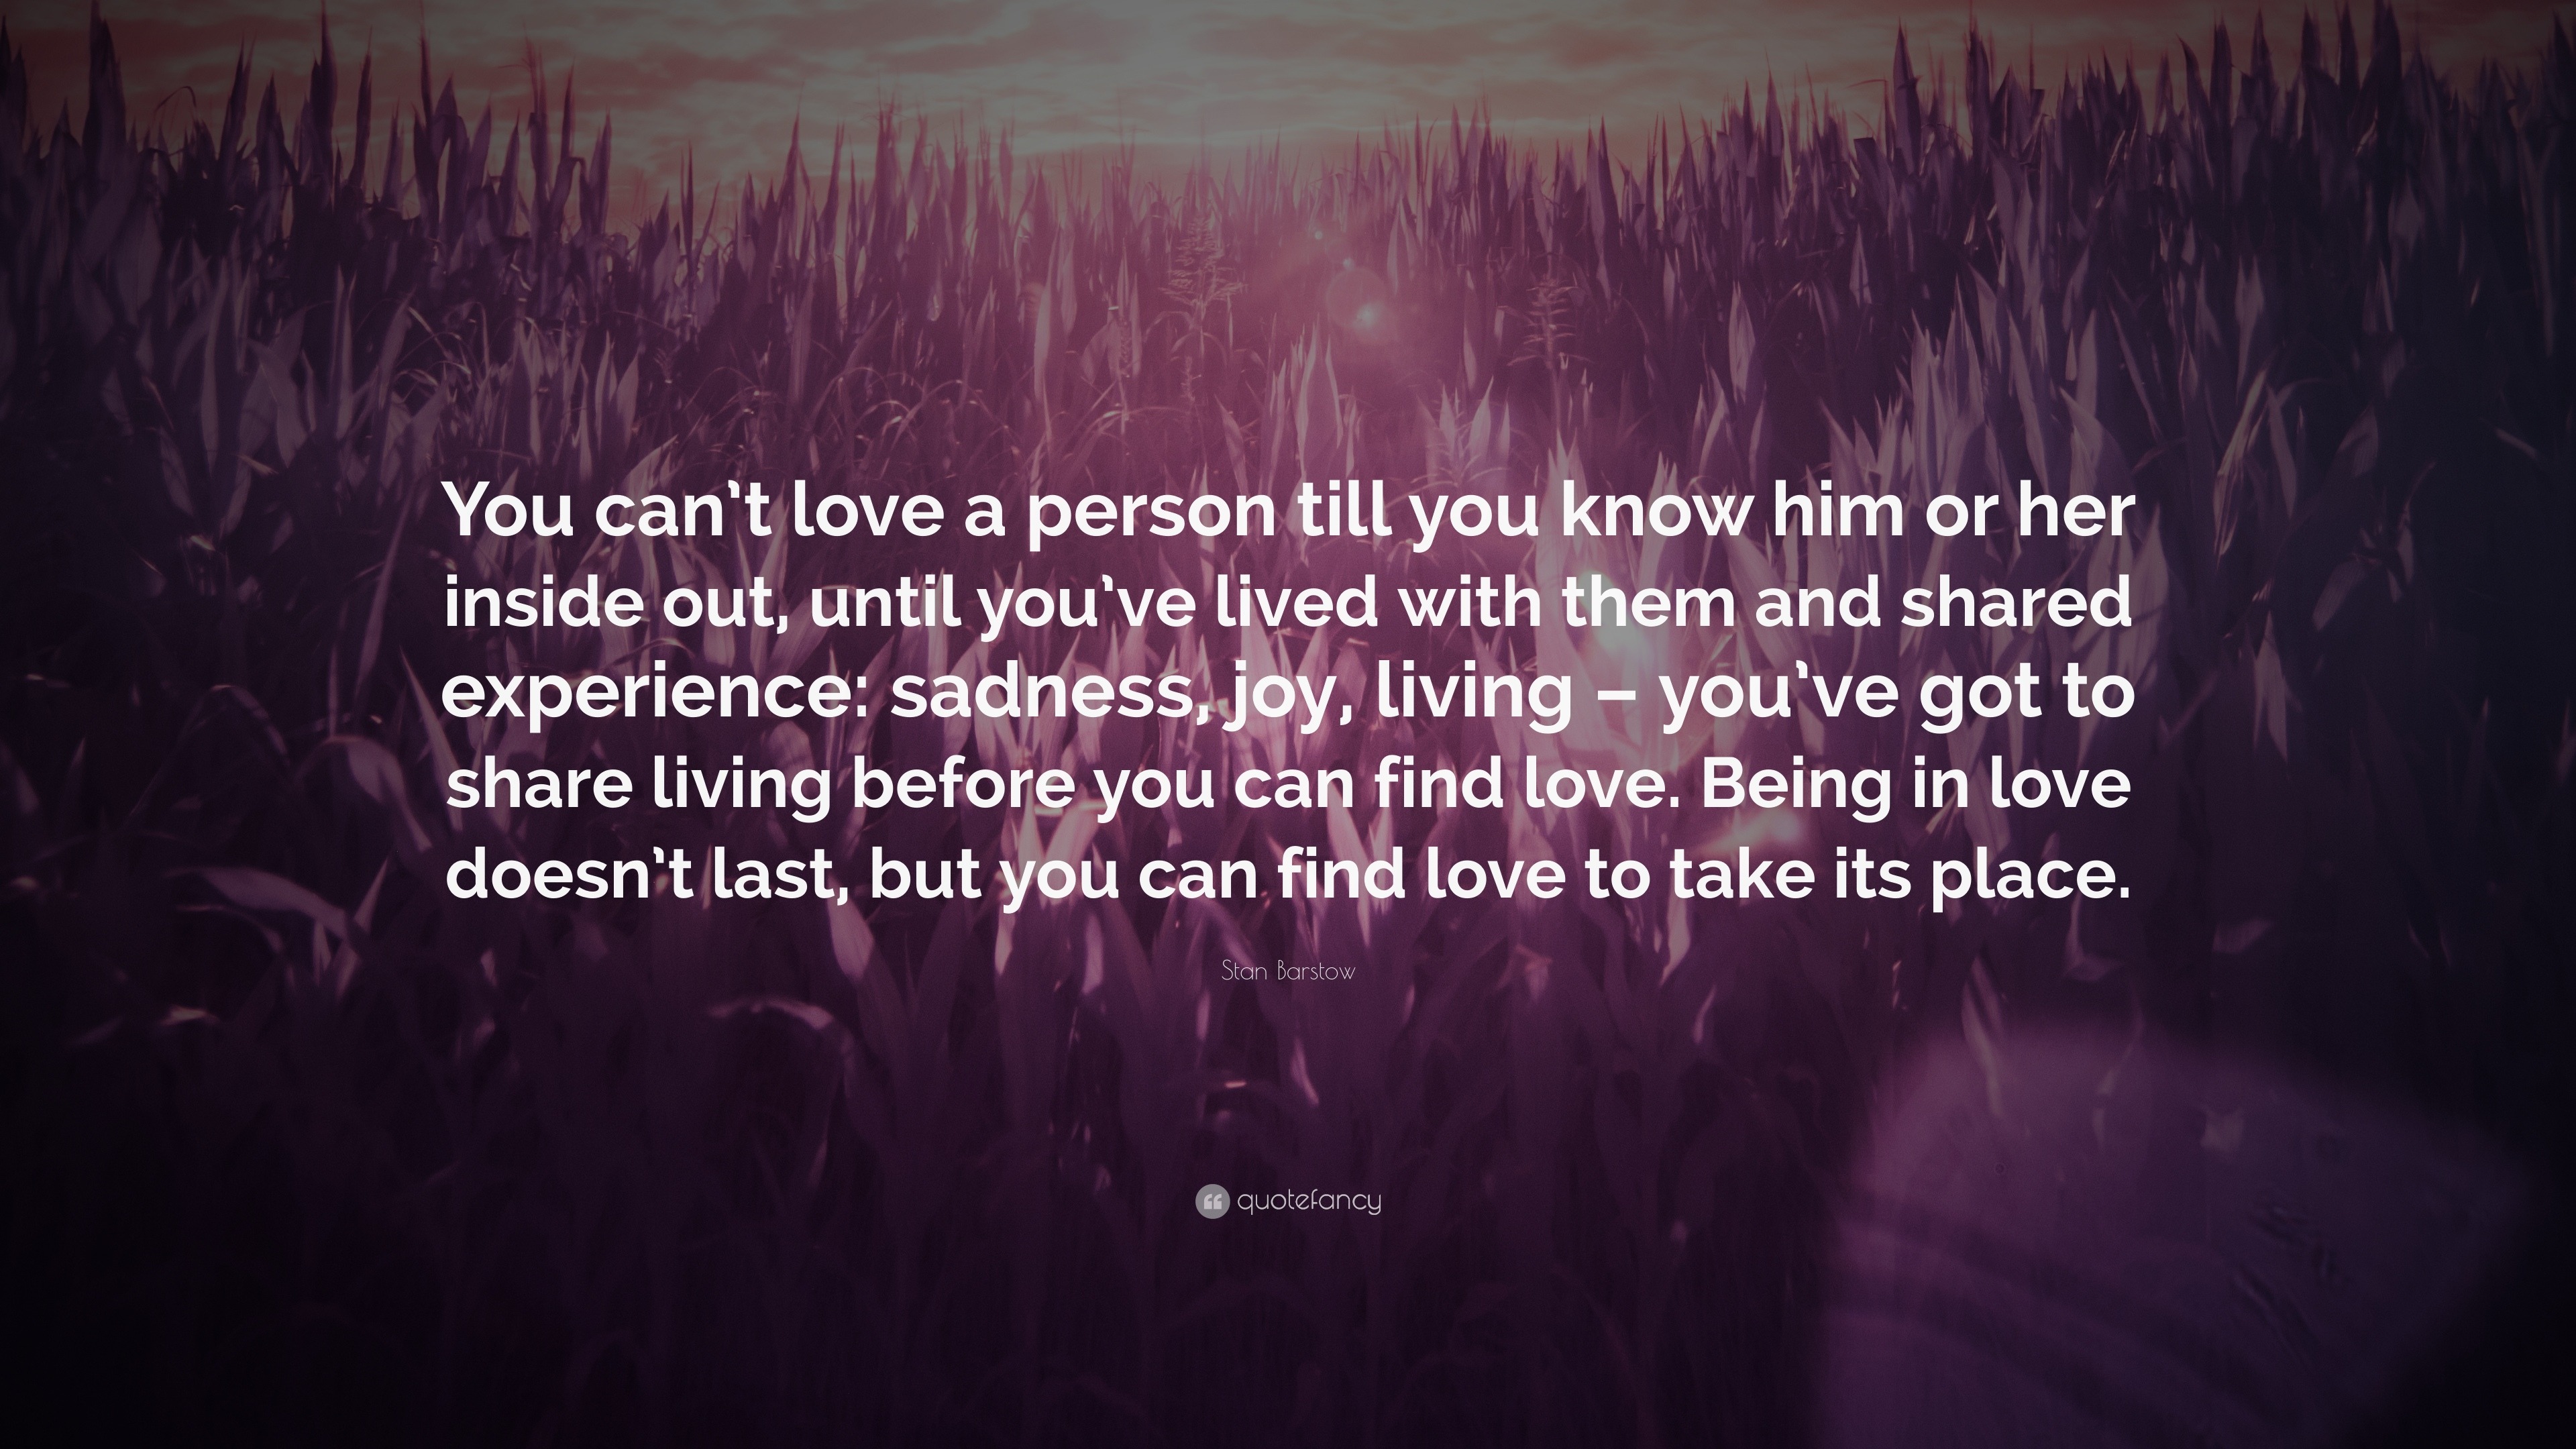 Unique Can T Find Love Quotes | Love quotes collection within HD images